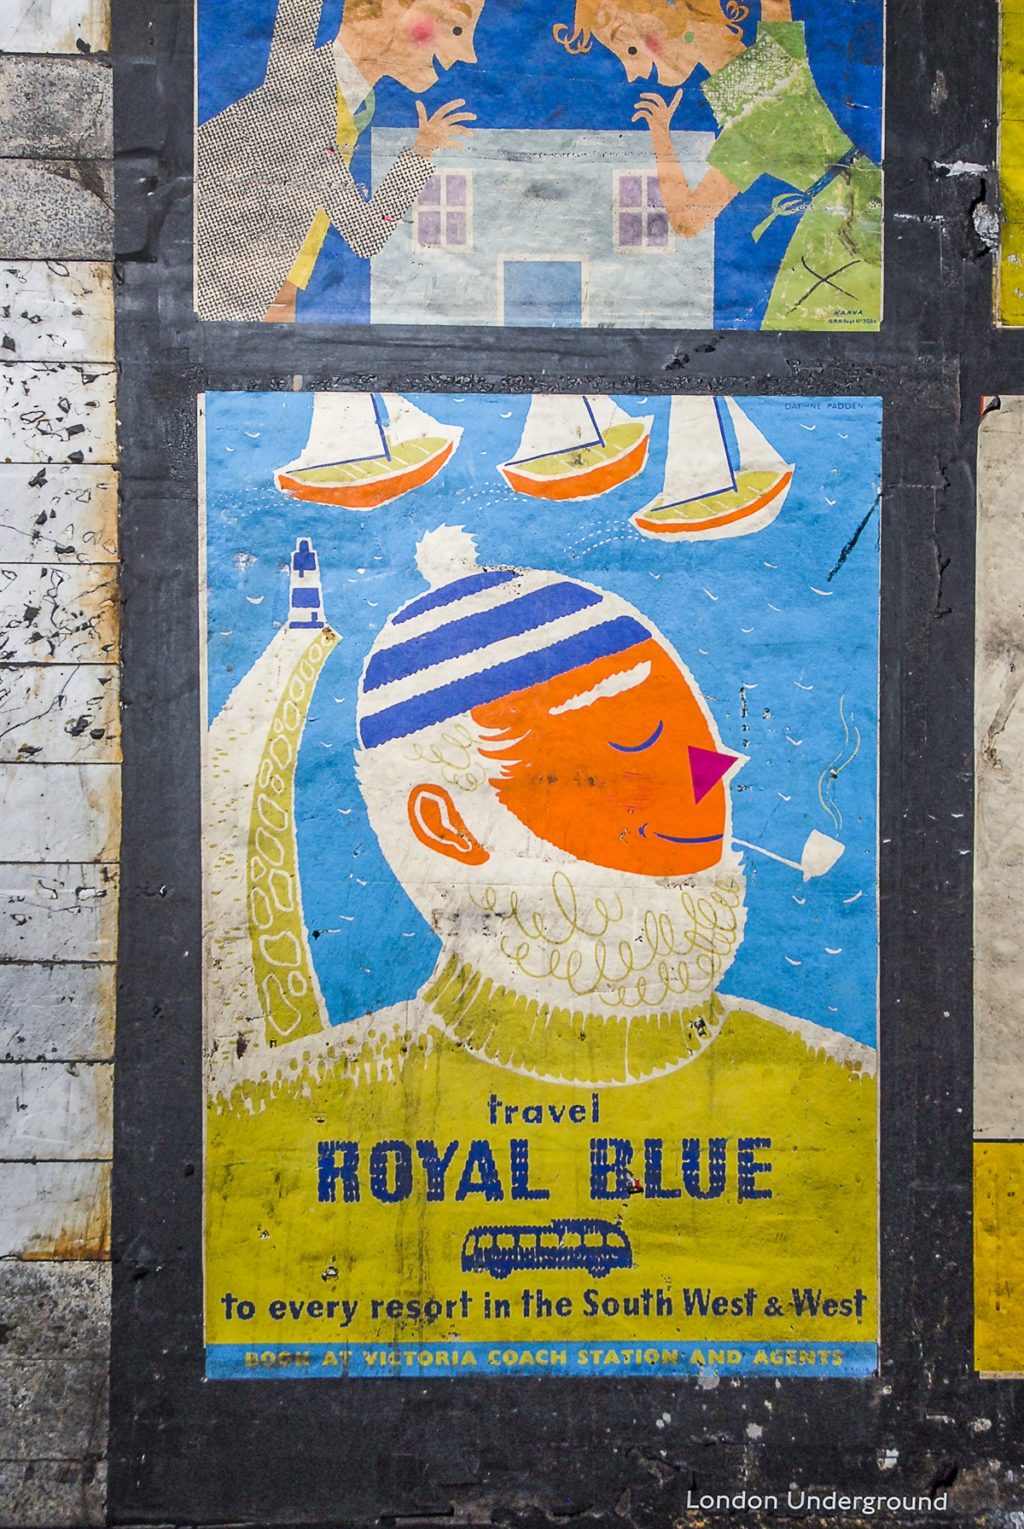 Advertising time capsule at Notting Hill Gate station in the form of a vintage 1950s poster.